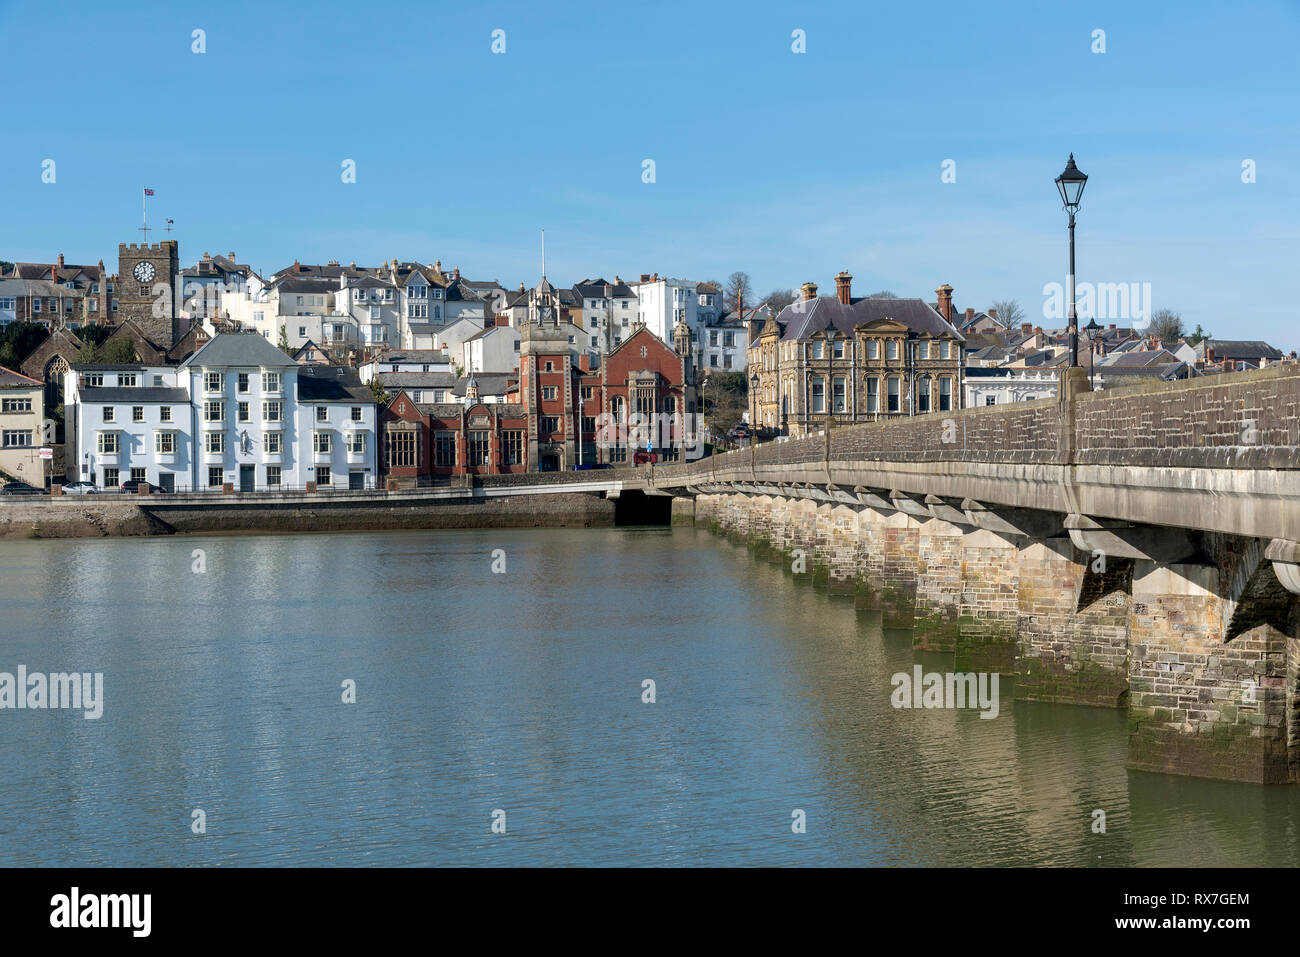 Bideford, North Devon, England UK. March 2019. Bideford town and the Bideford Long Bridge built in 1850 viewed from East the Water. Stock Photo